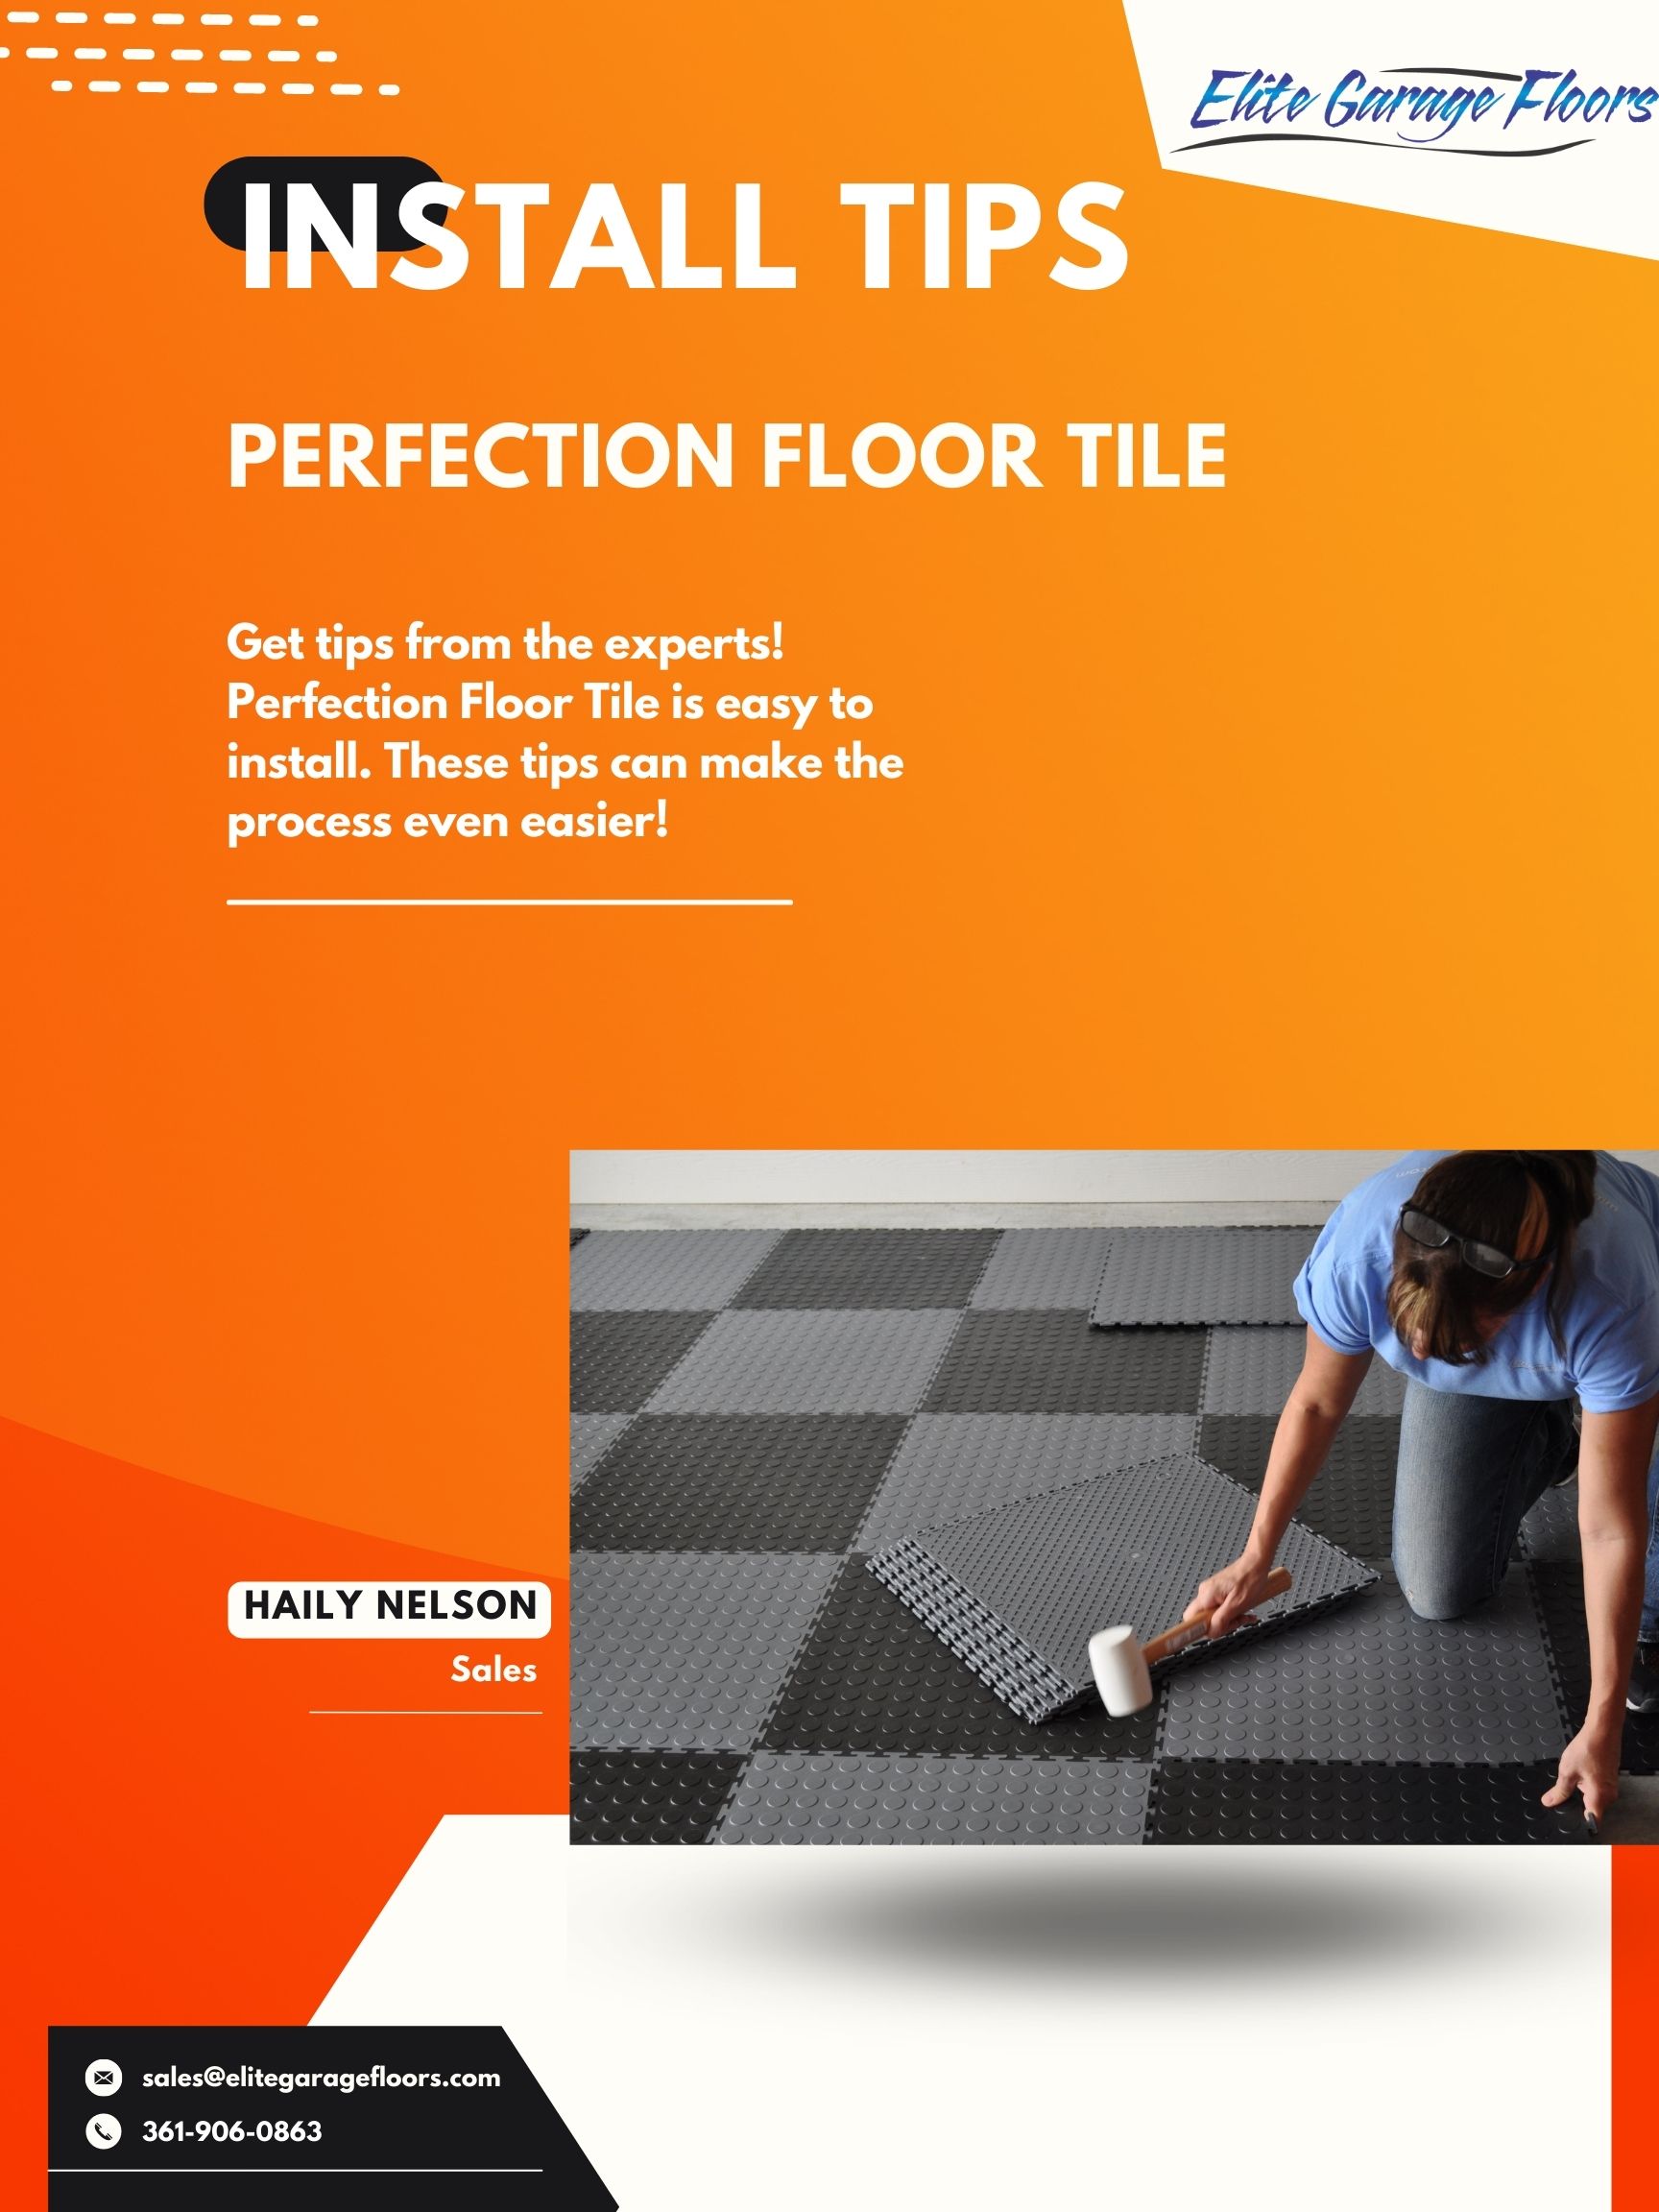 Perfection Floor Tile Install Tips